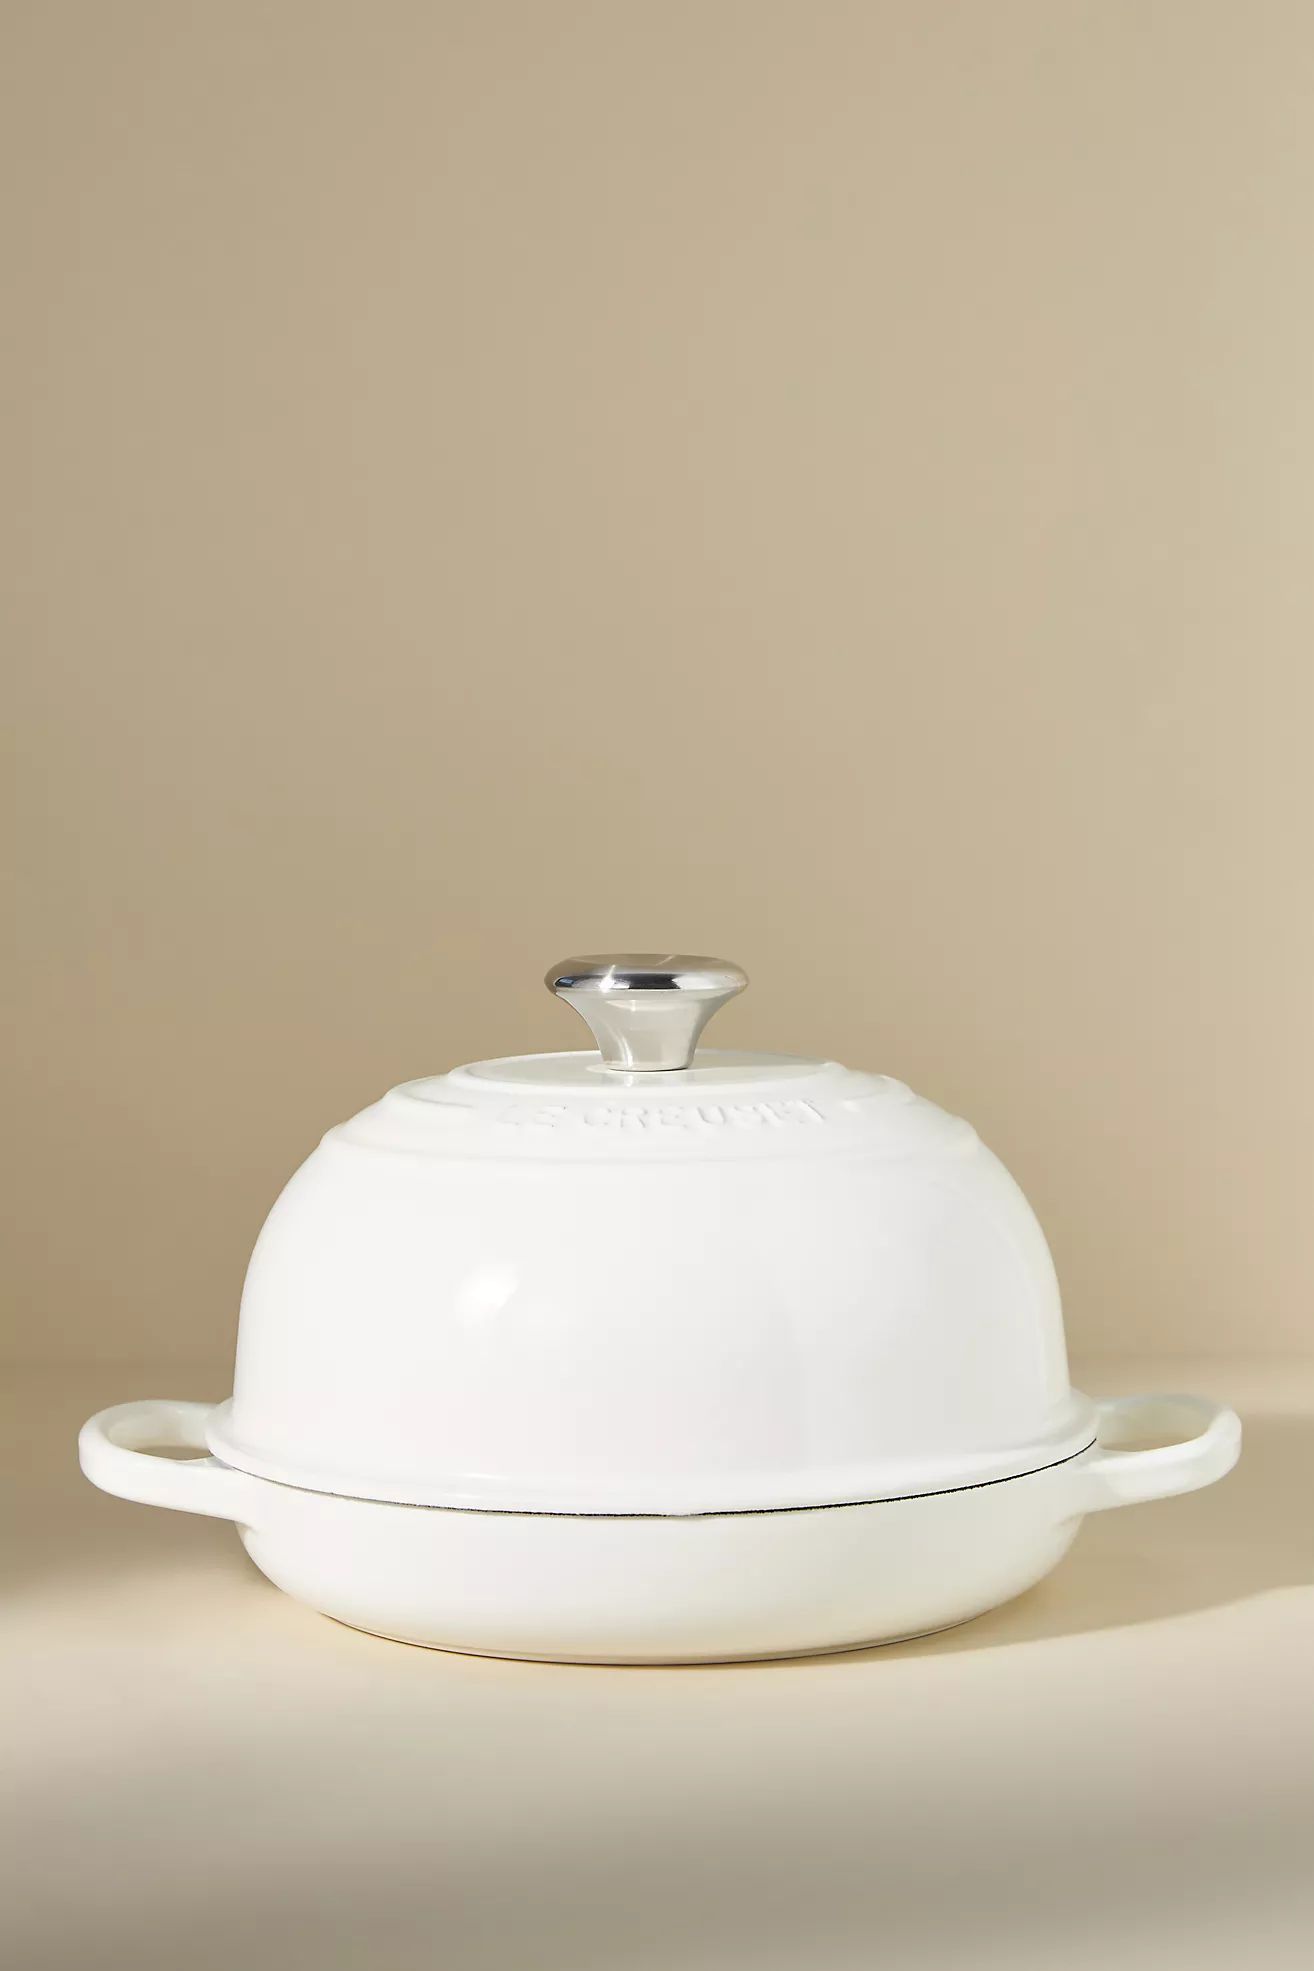 Le Creuset 9.5" Bread Oven | Anthropologie (US)